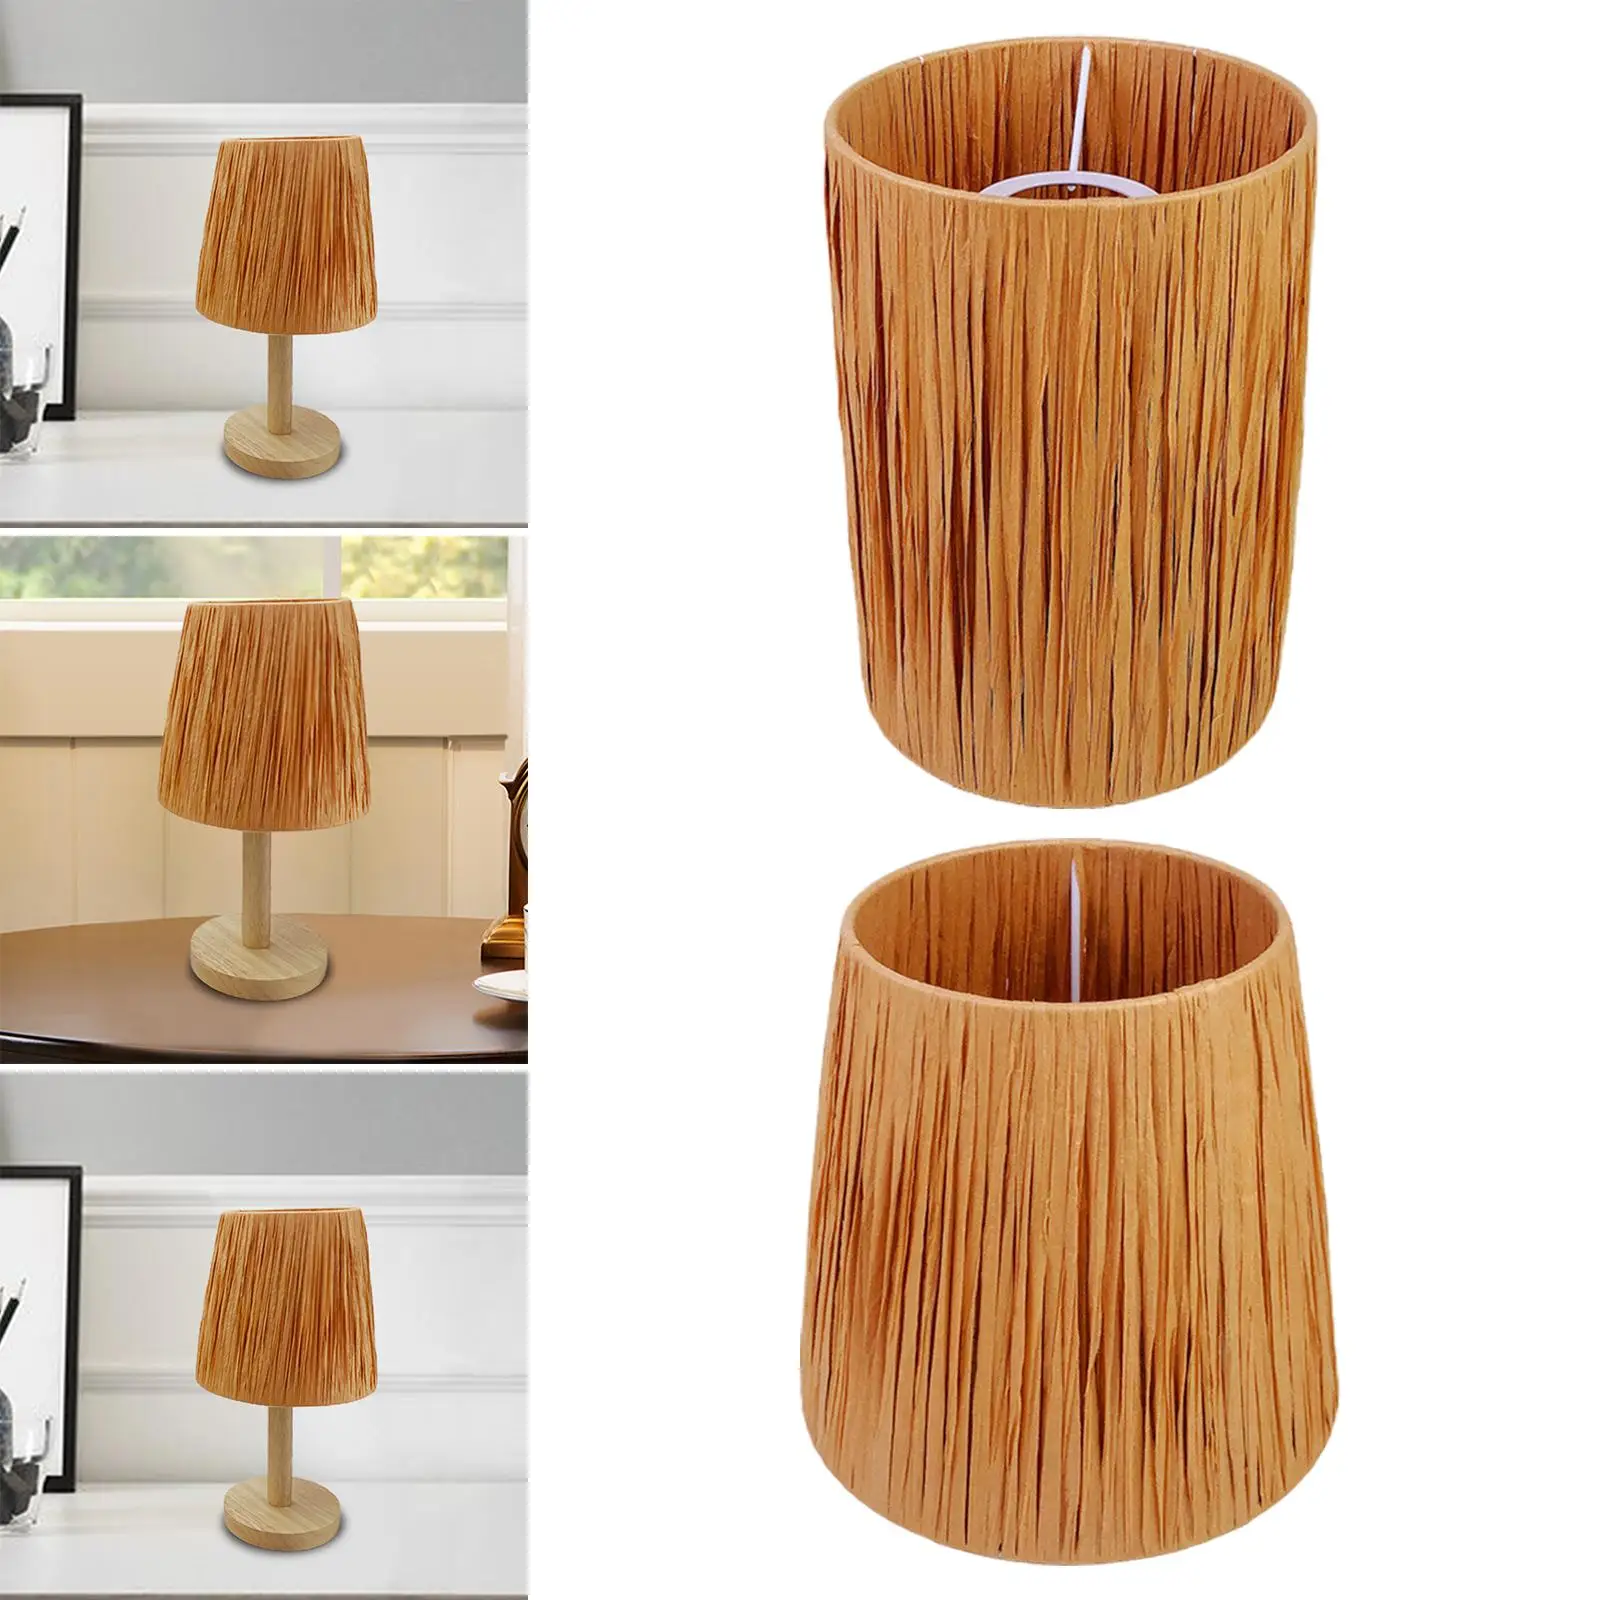 Lamp Shade Easy Installation Practical Lamp Covers Handwoven Modern European Style for Office Dining Room Kitchen Table Decor